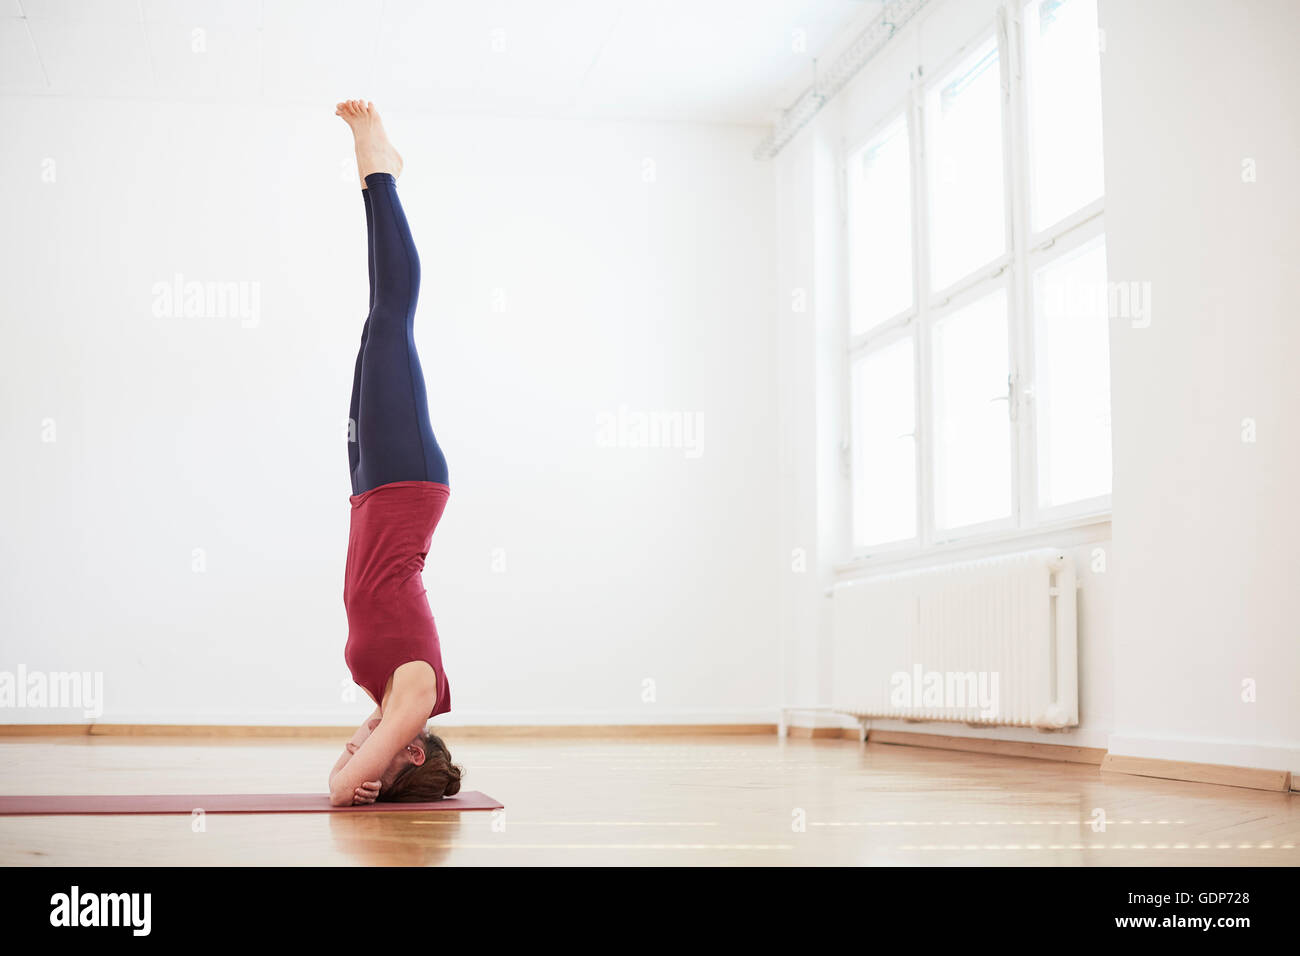 Woman in exercise studio doing headstand Stock Photo